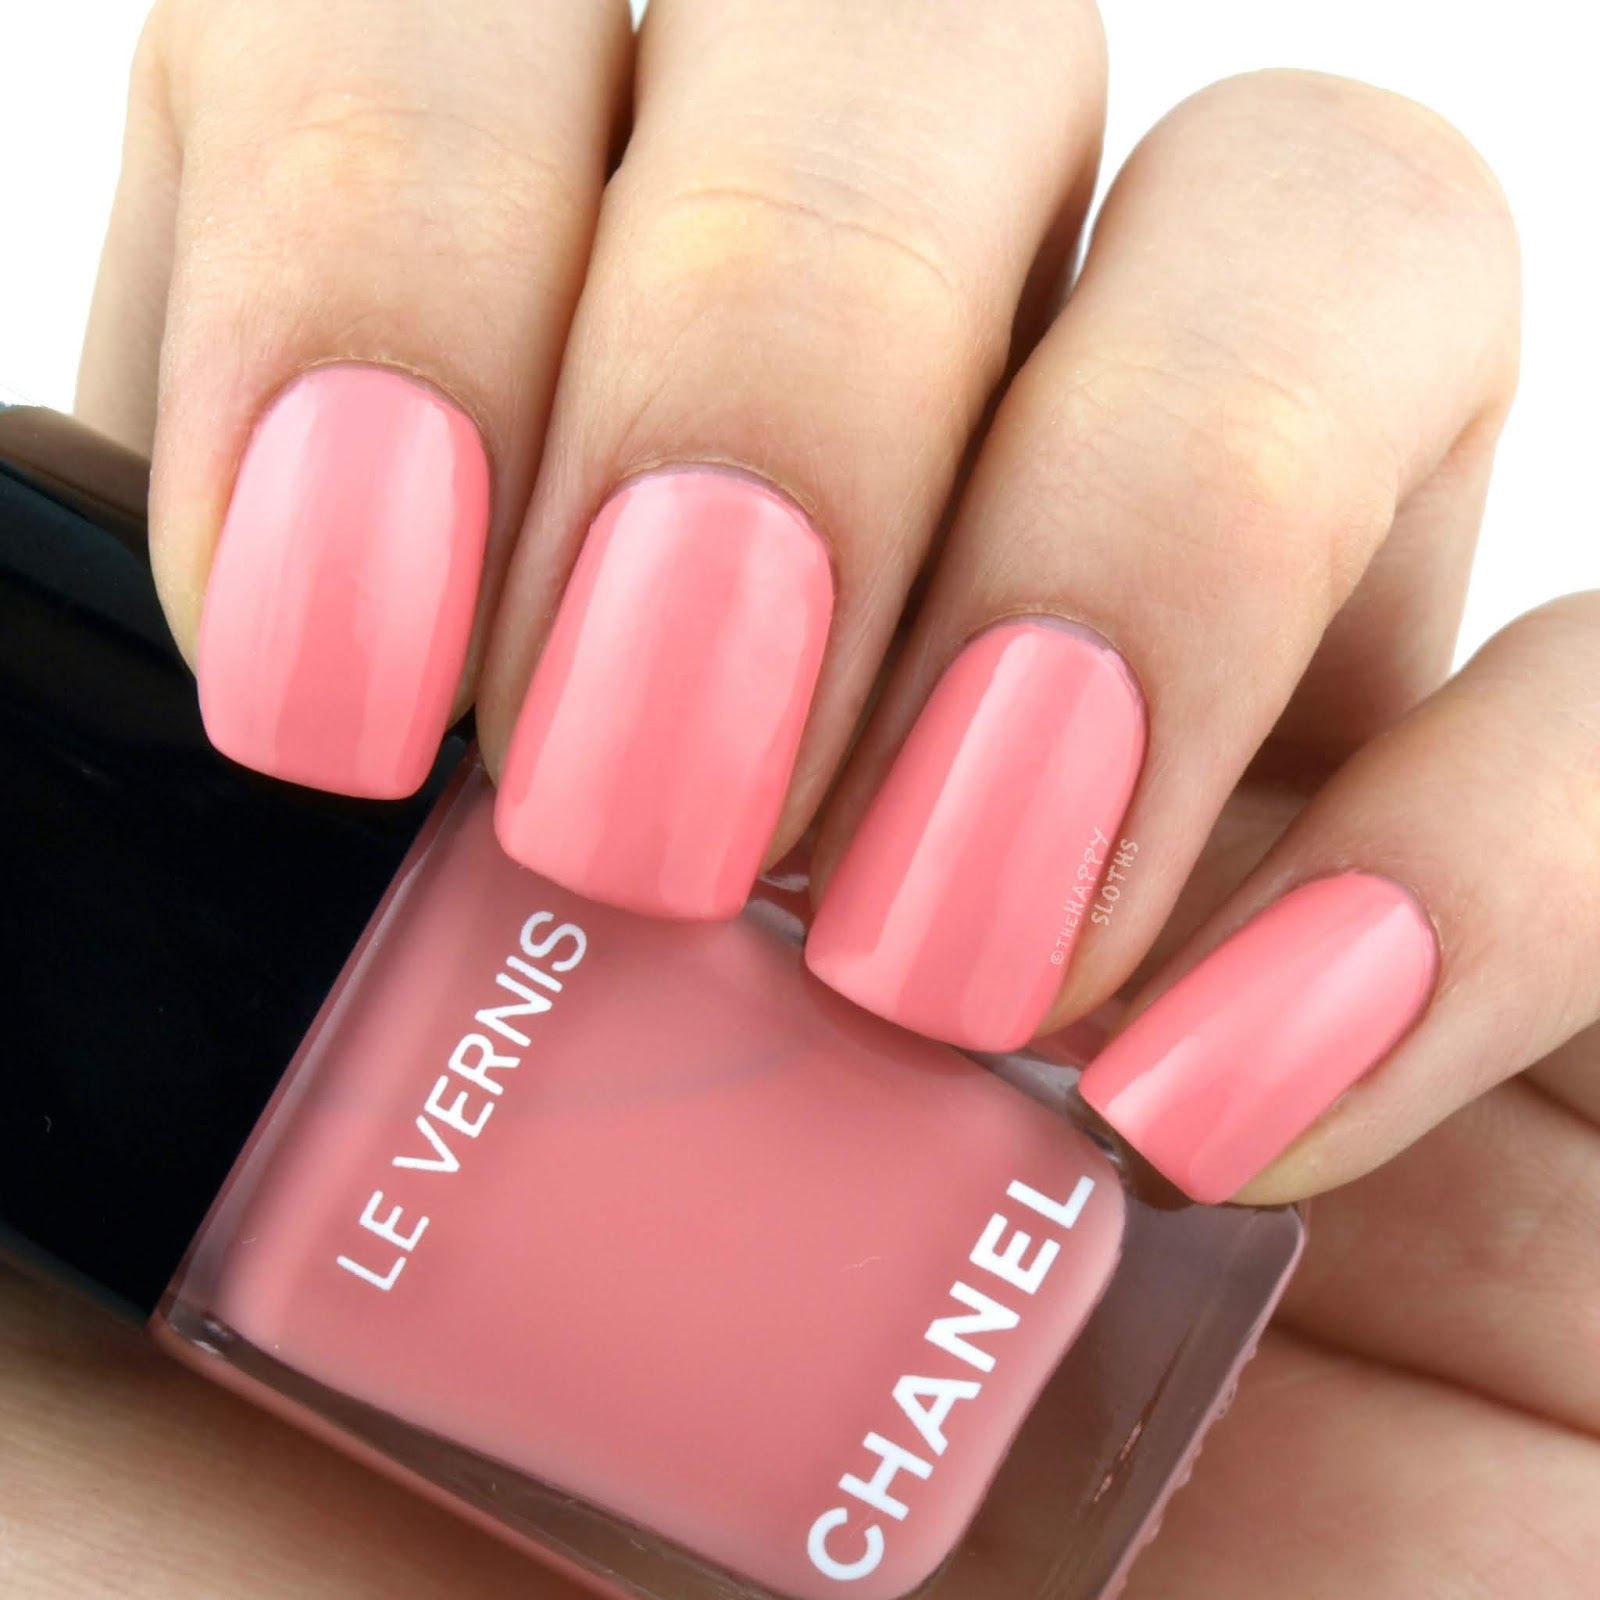 Chanel Cruise 2018 | Le Vernis Nail Polish in "610 Halo": Review and Swatches